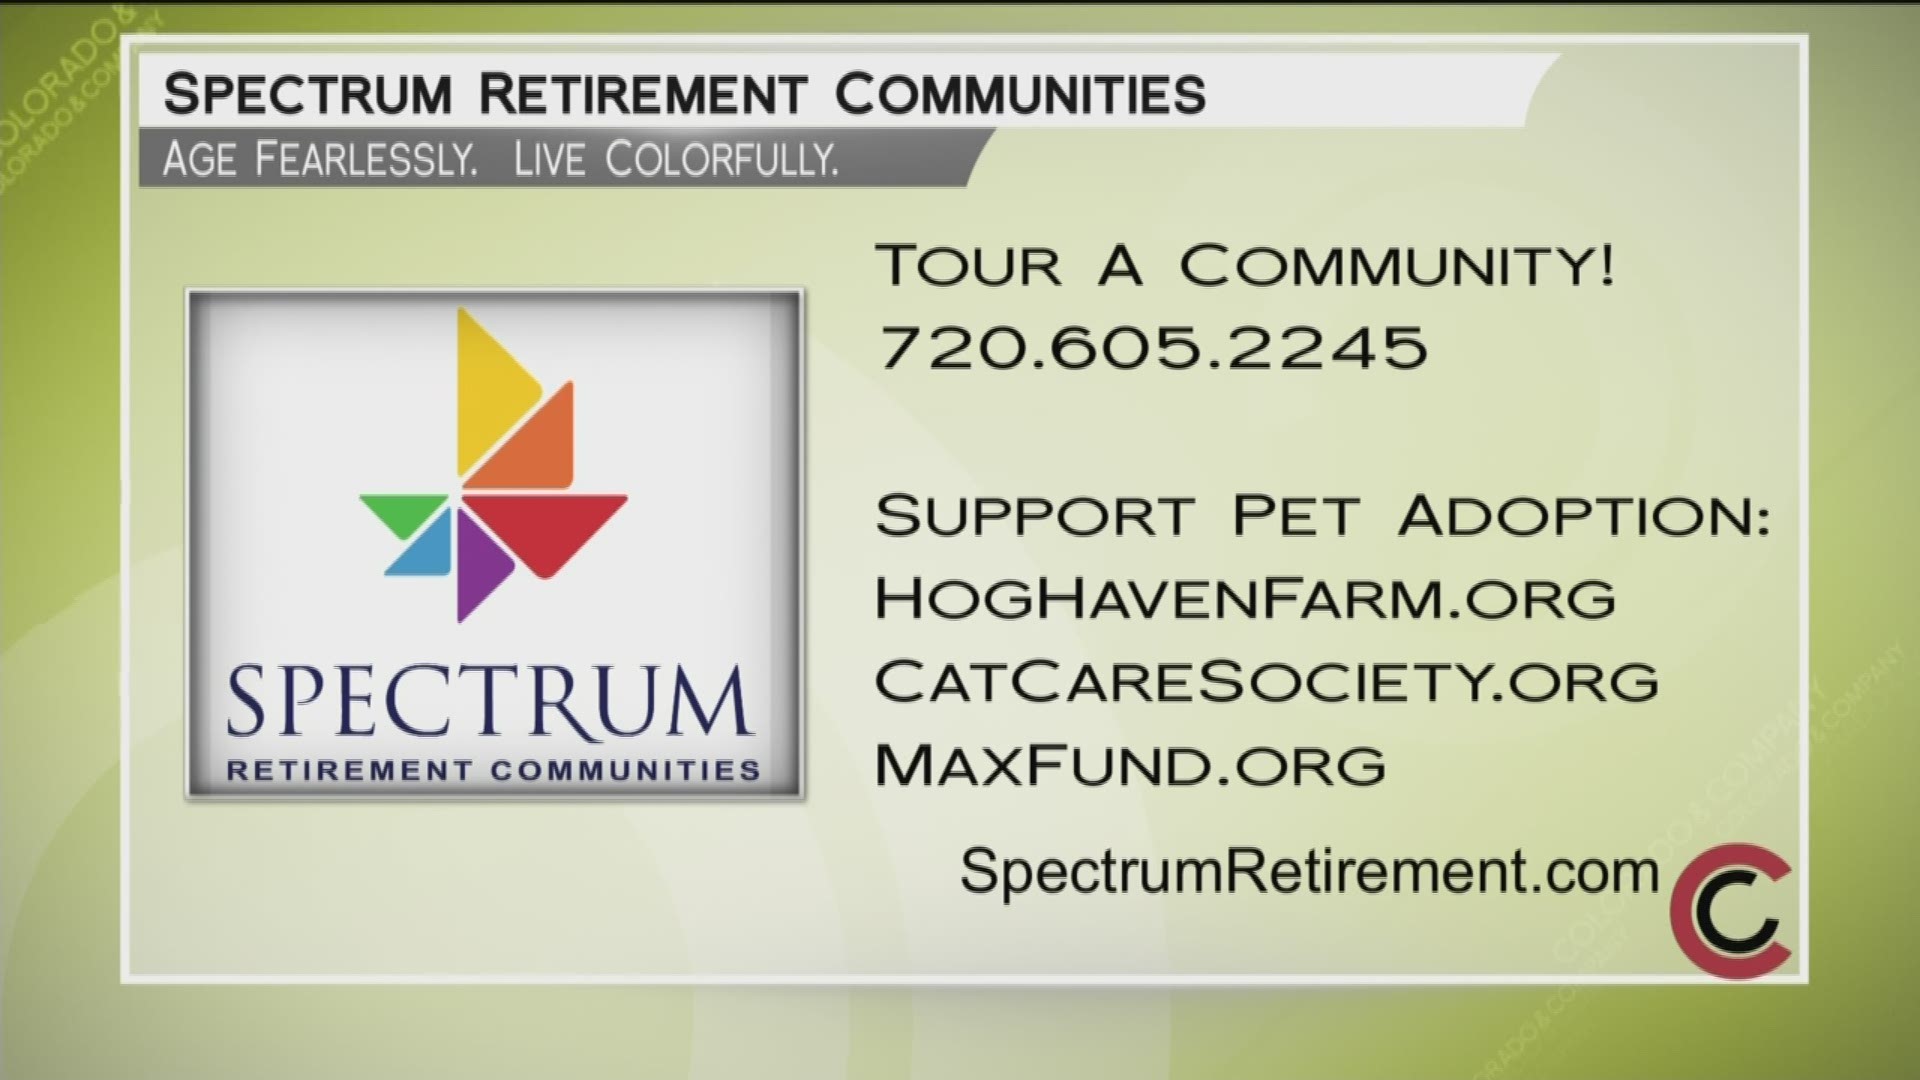 Spectrum Retirement Communities can be your next great journey in life! Learn more about Spectrum at SpectrumRetirement.com or call 720.605.2245.